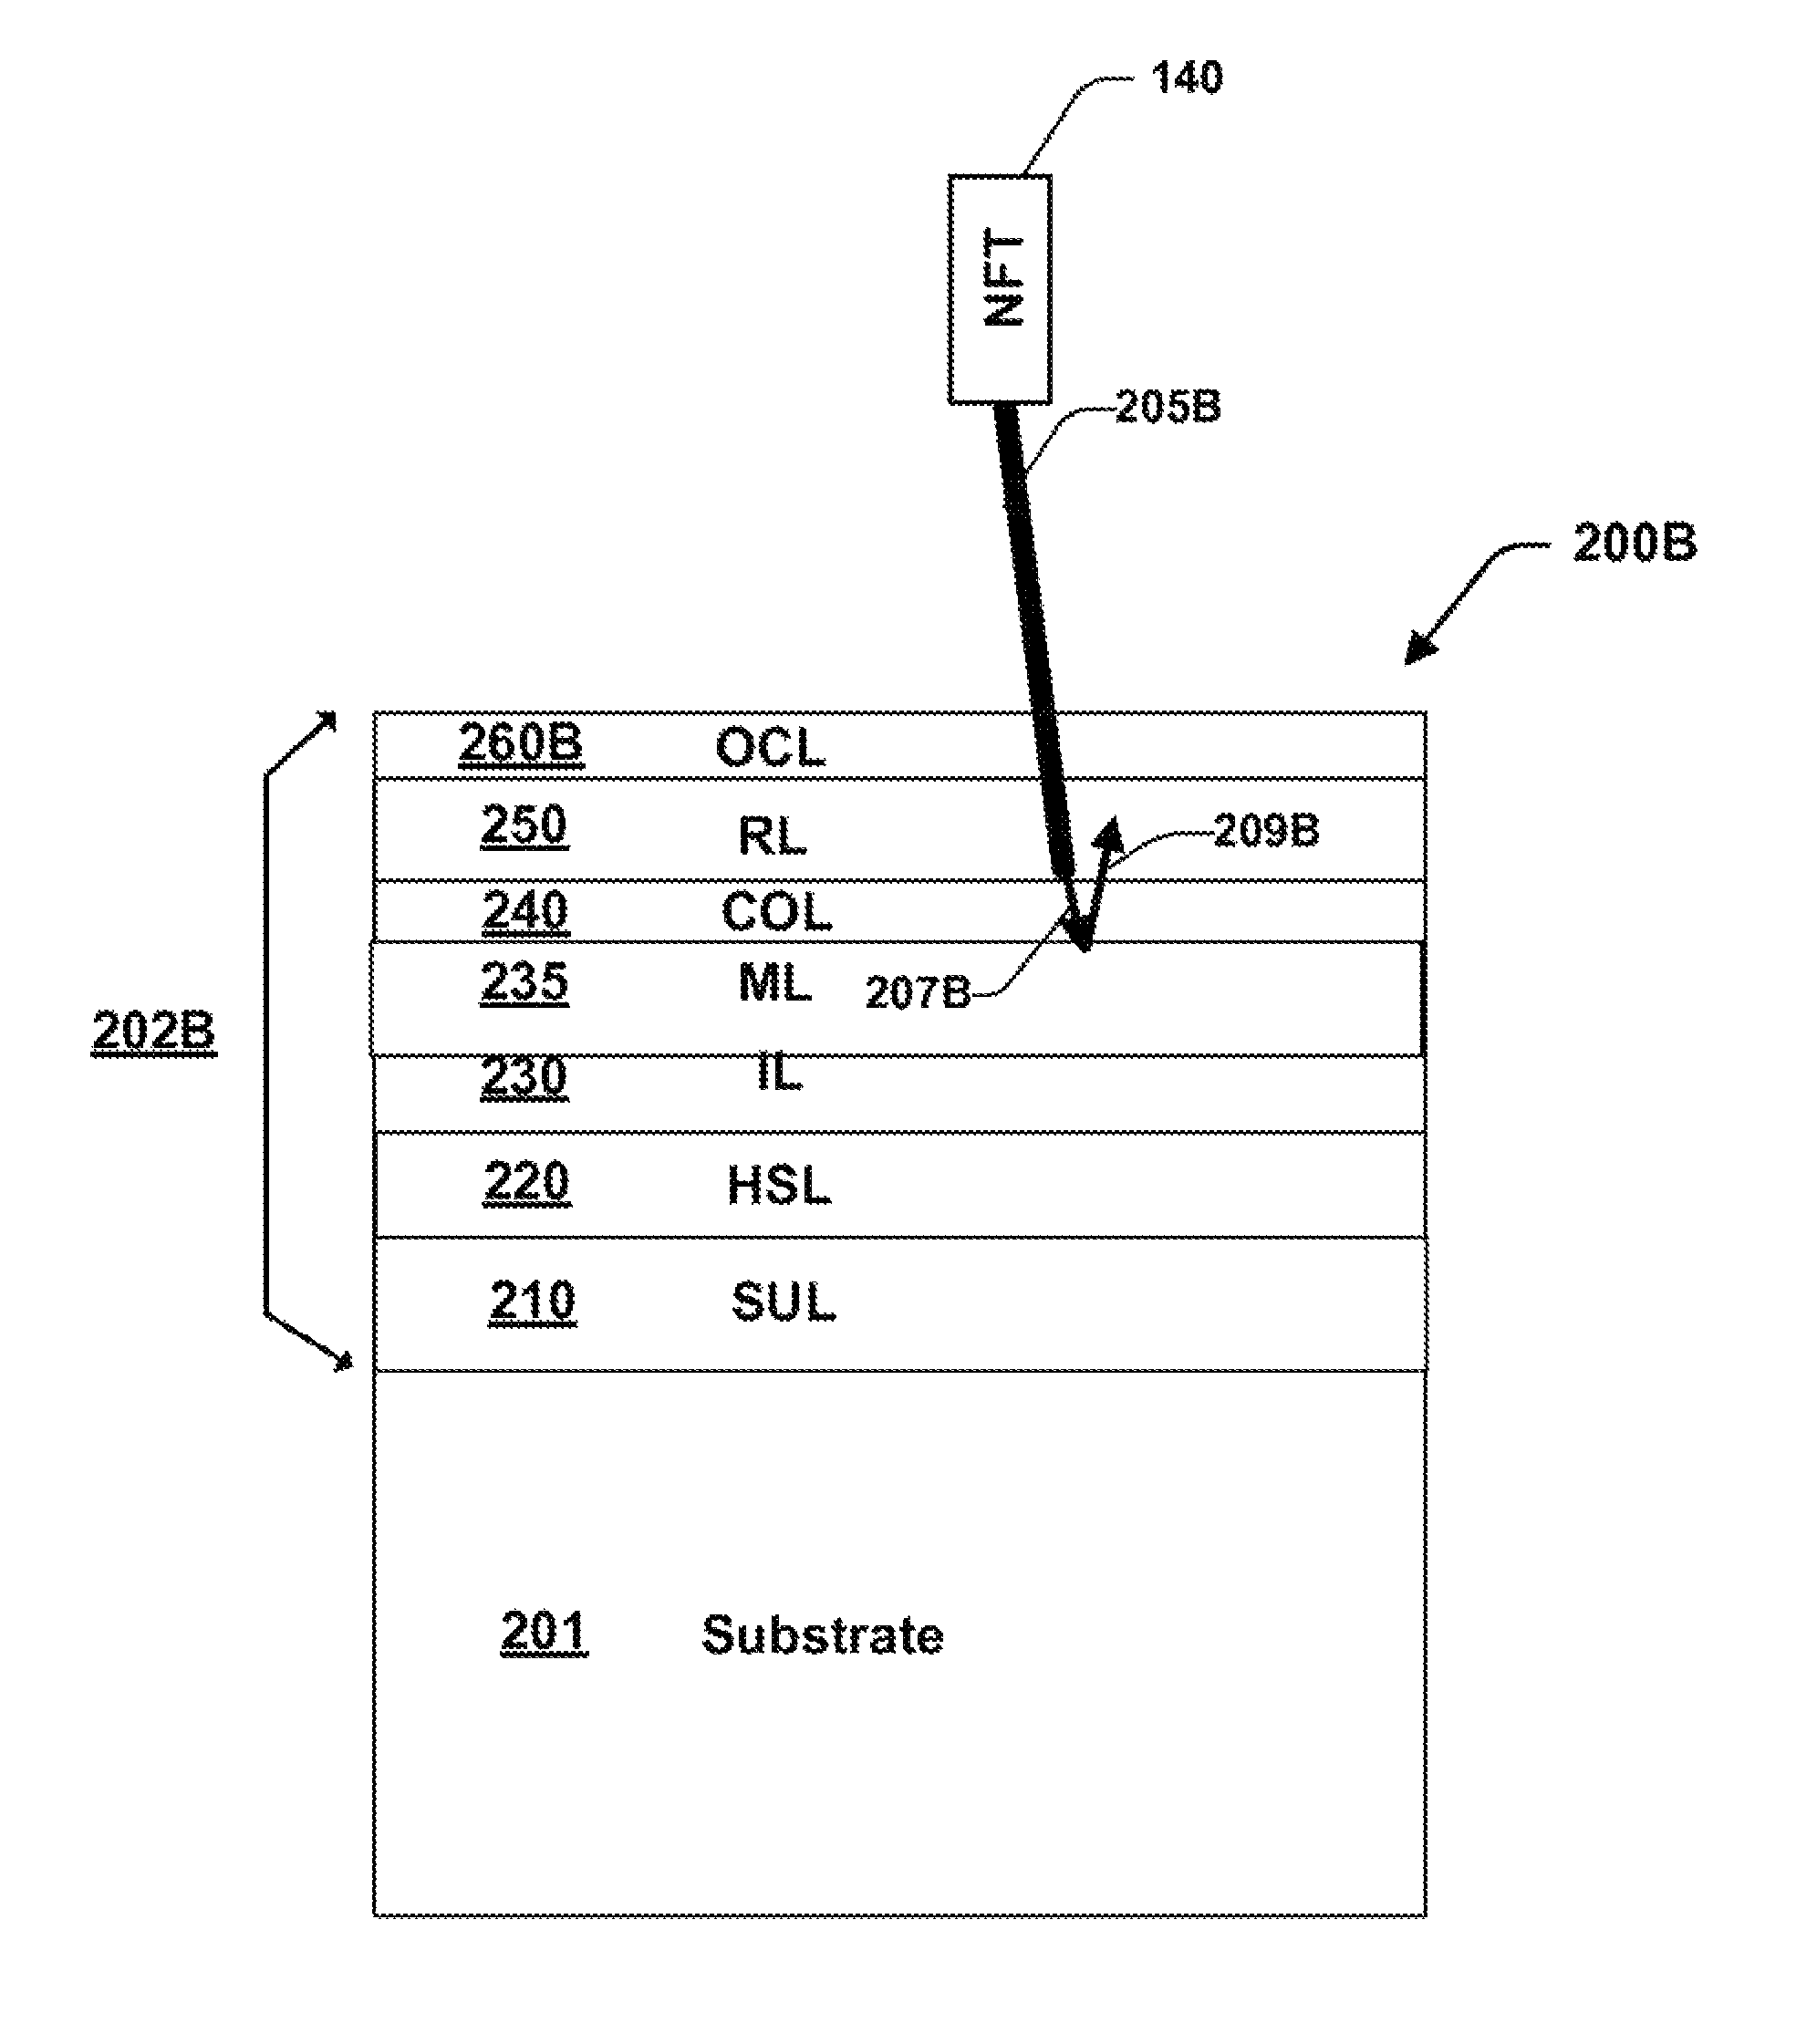 Absorption enhanced media for energy assisted magnetic recording